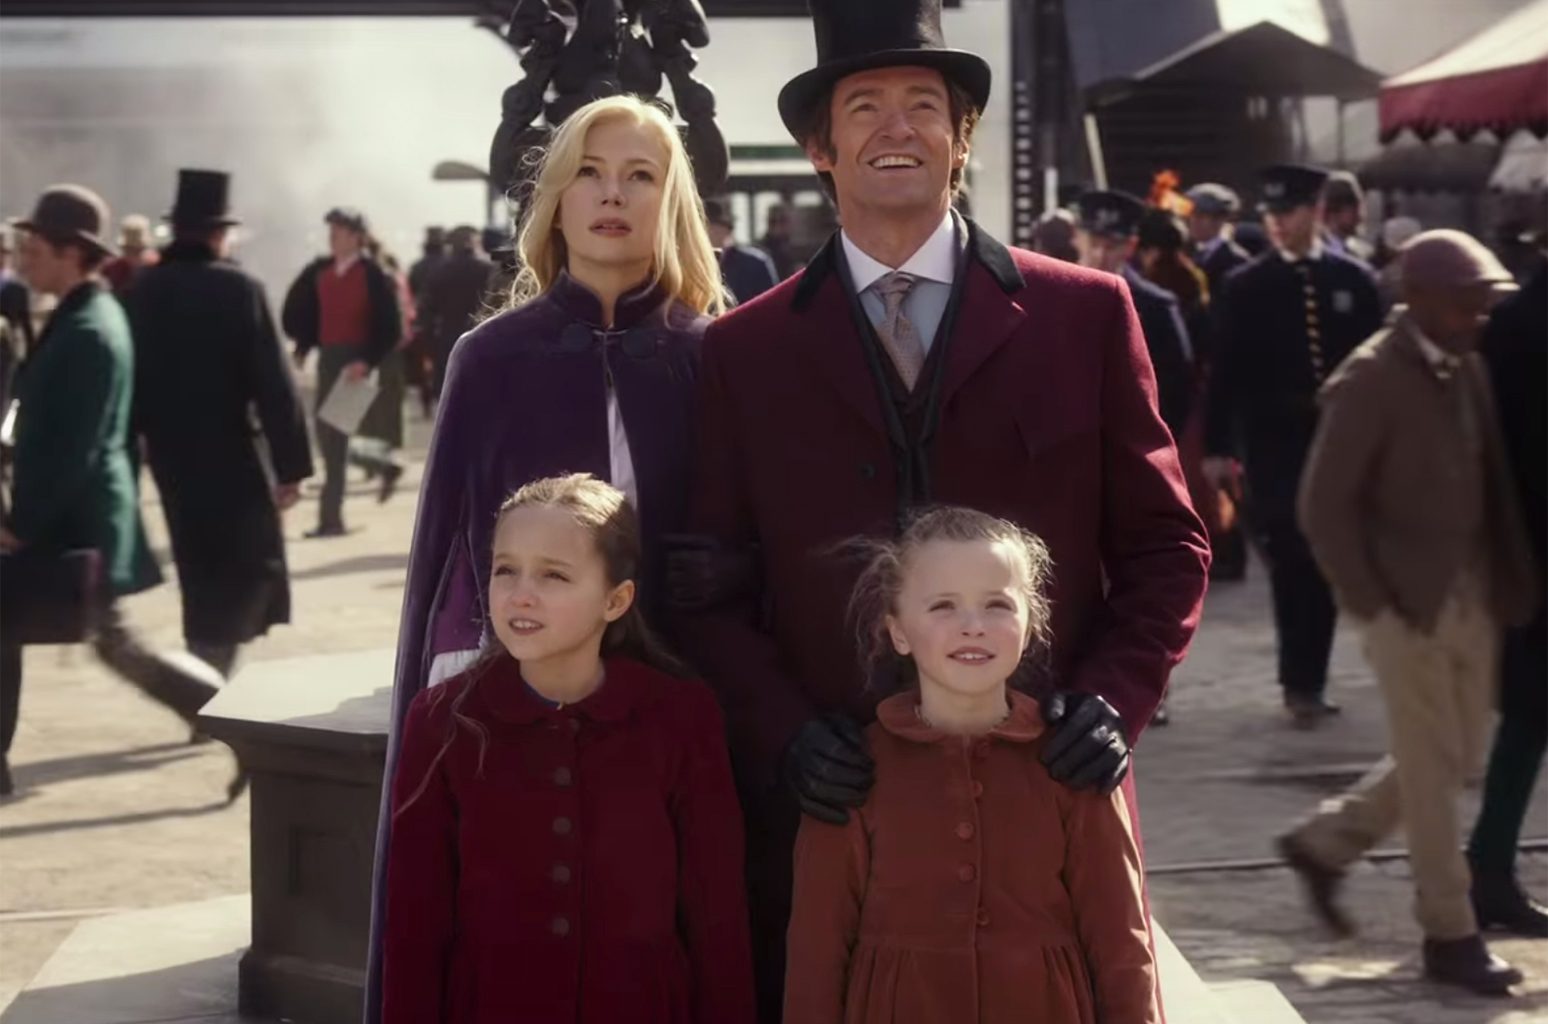 FAMILY. Hugh Jackman and Michelle Williams in a scene from 'The Greatest Showman' 